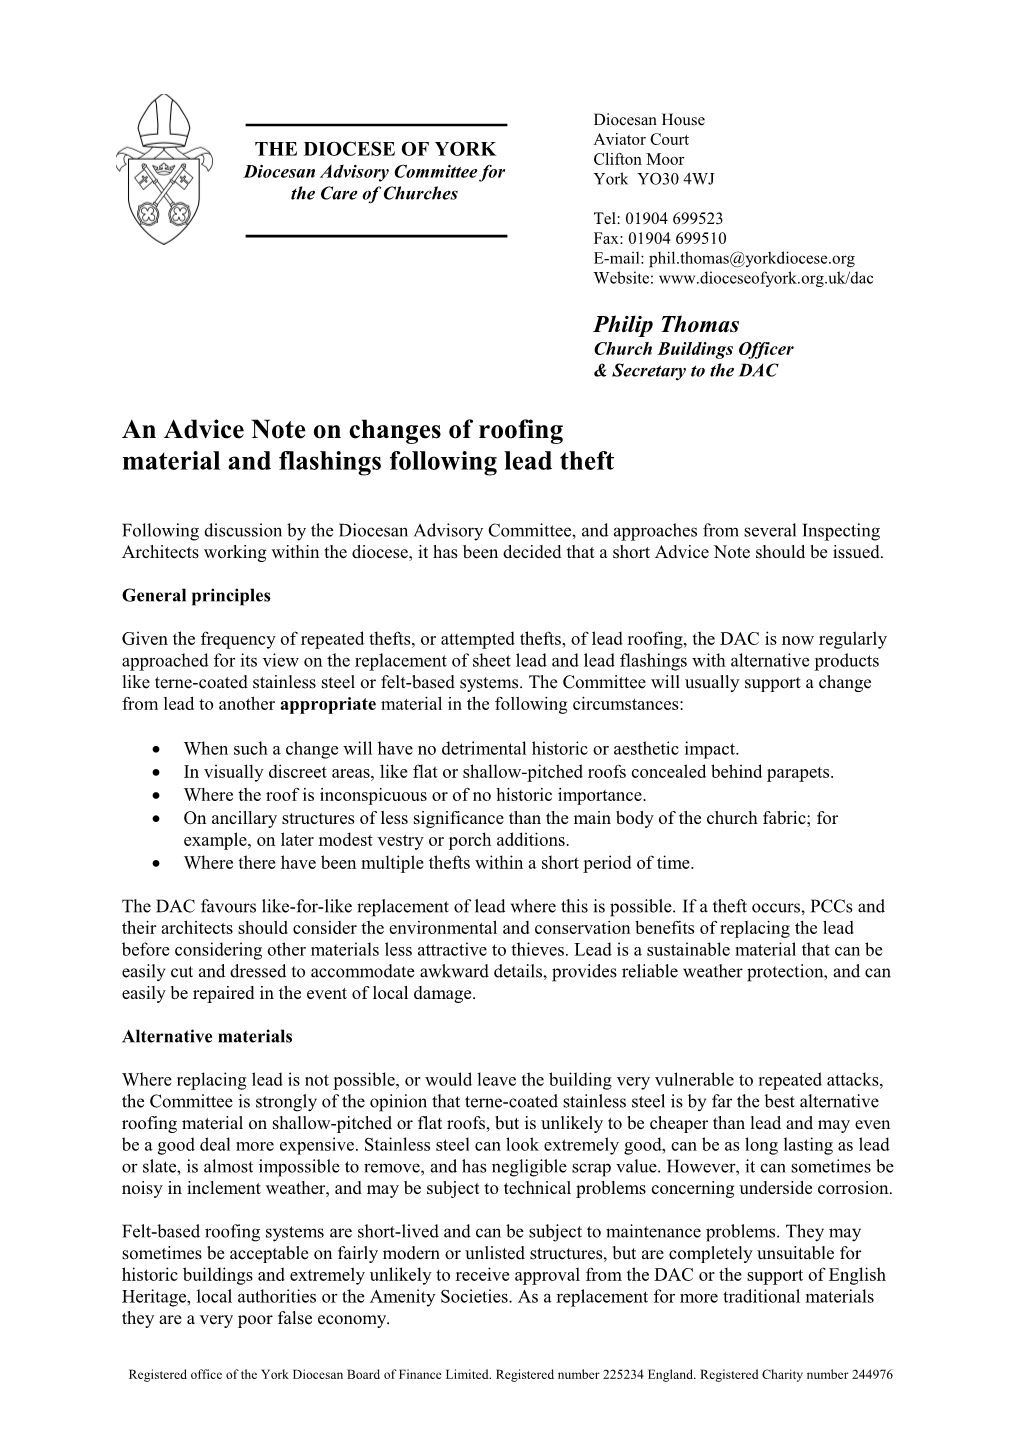 An Advice Note on Changes of Roofing Material and Flashings Following Lead Theft